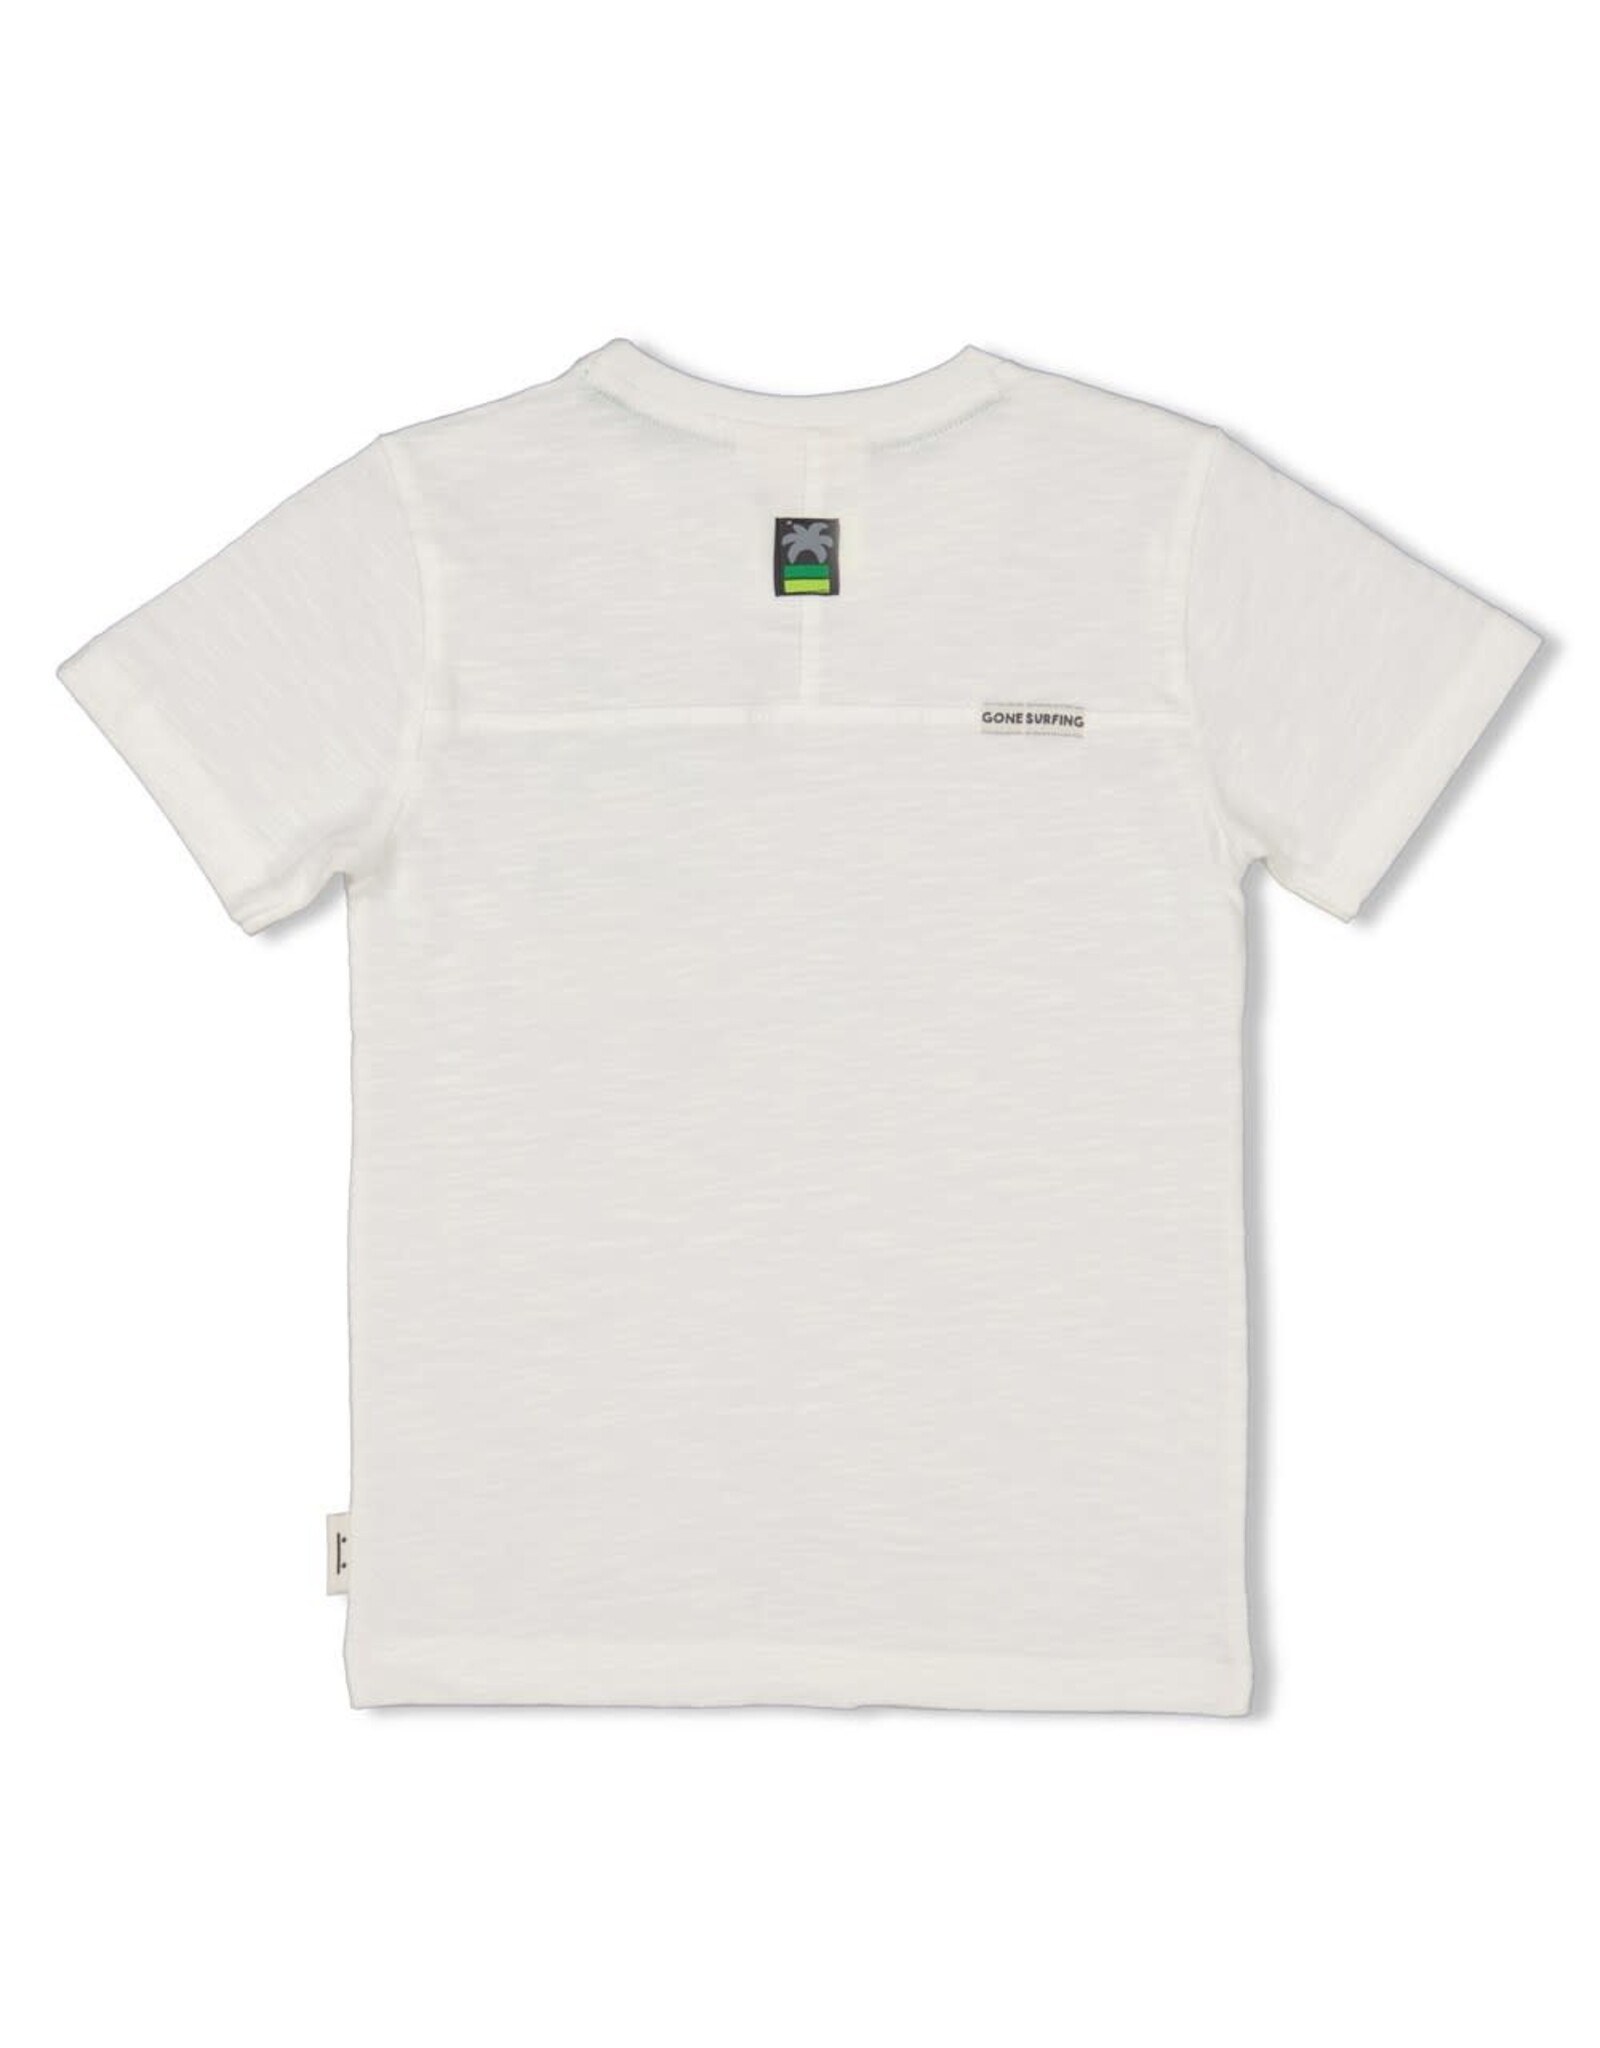 Sturdy T-shirt - Gone Surfing Offwhite